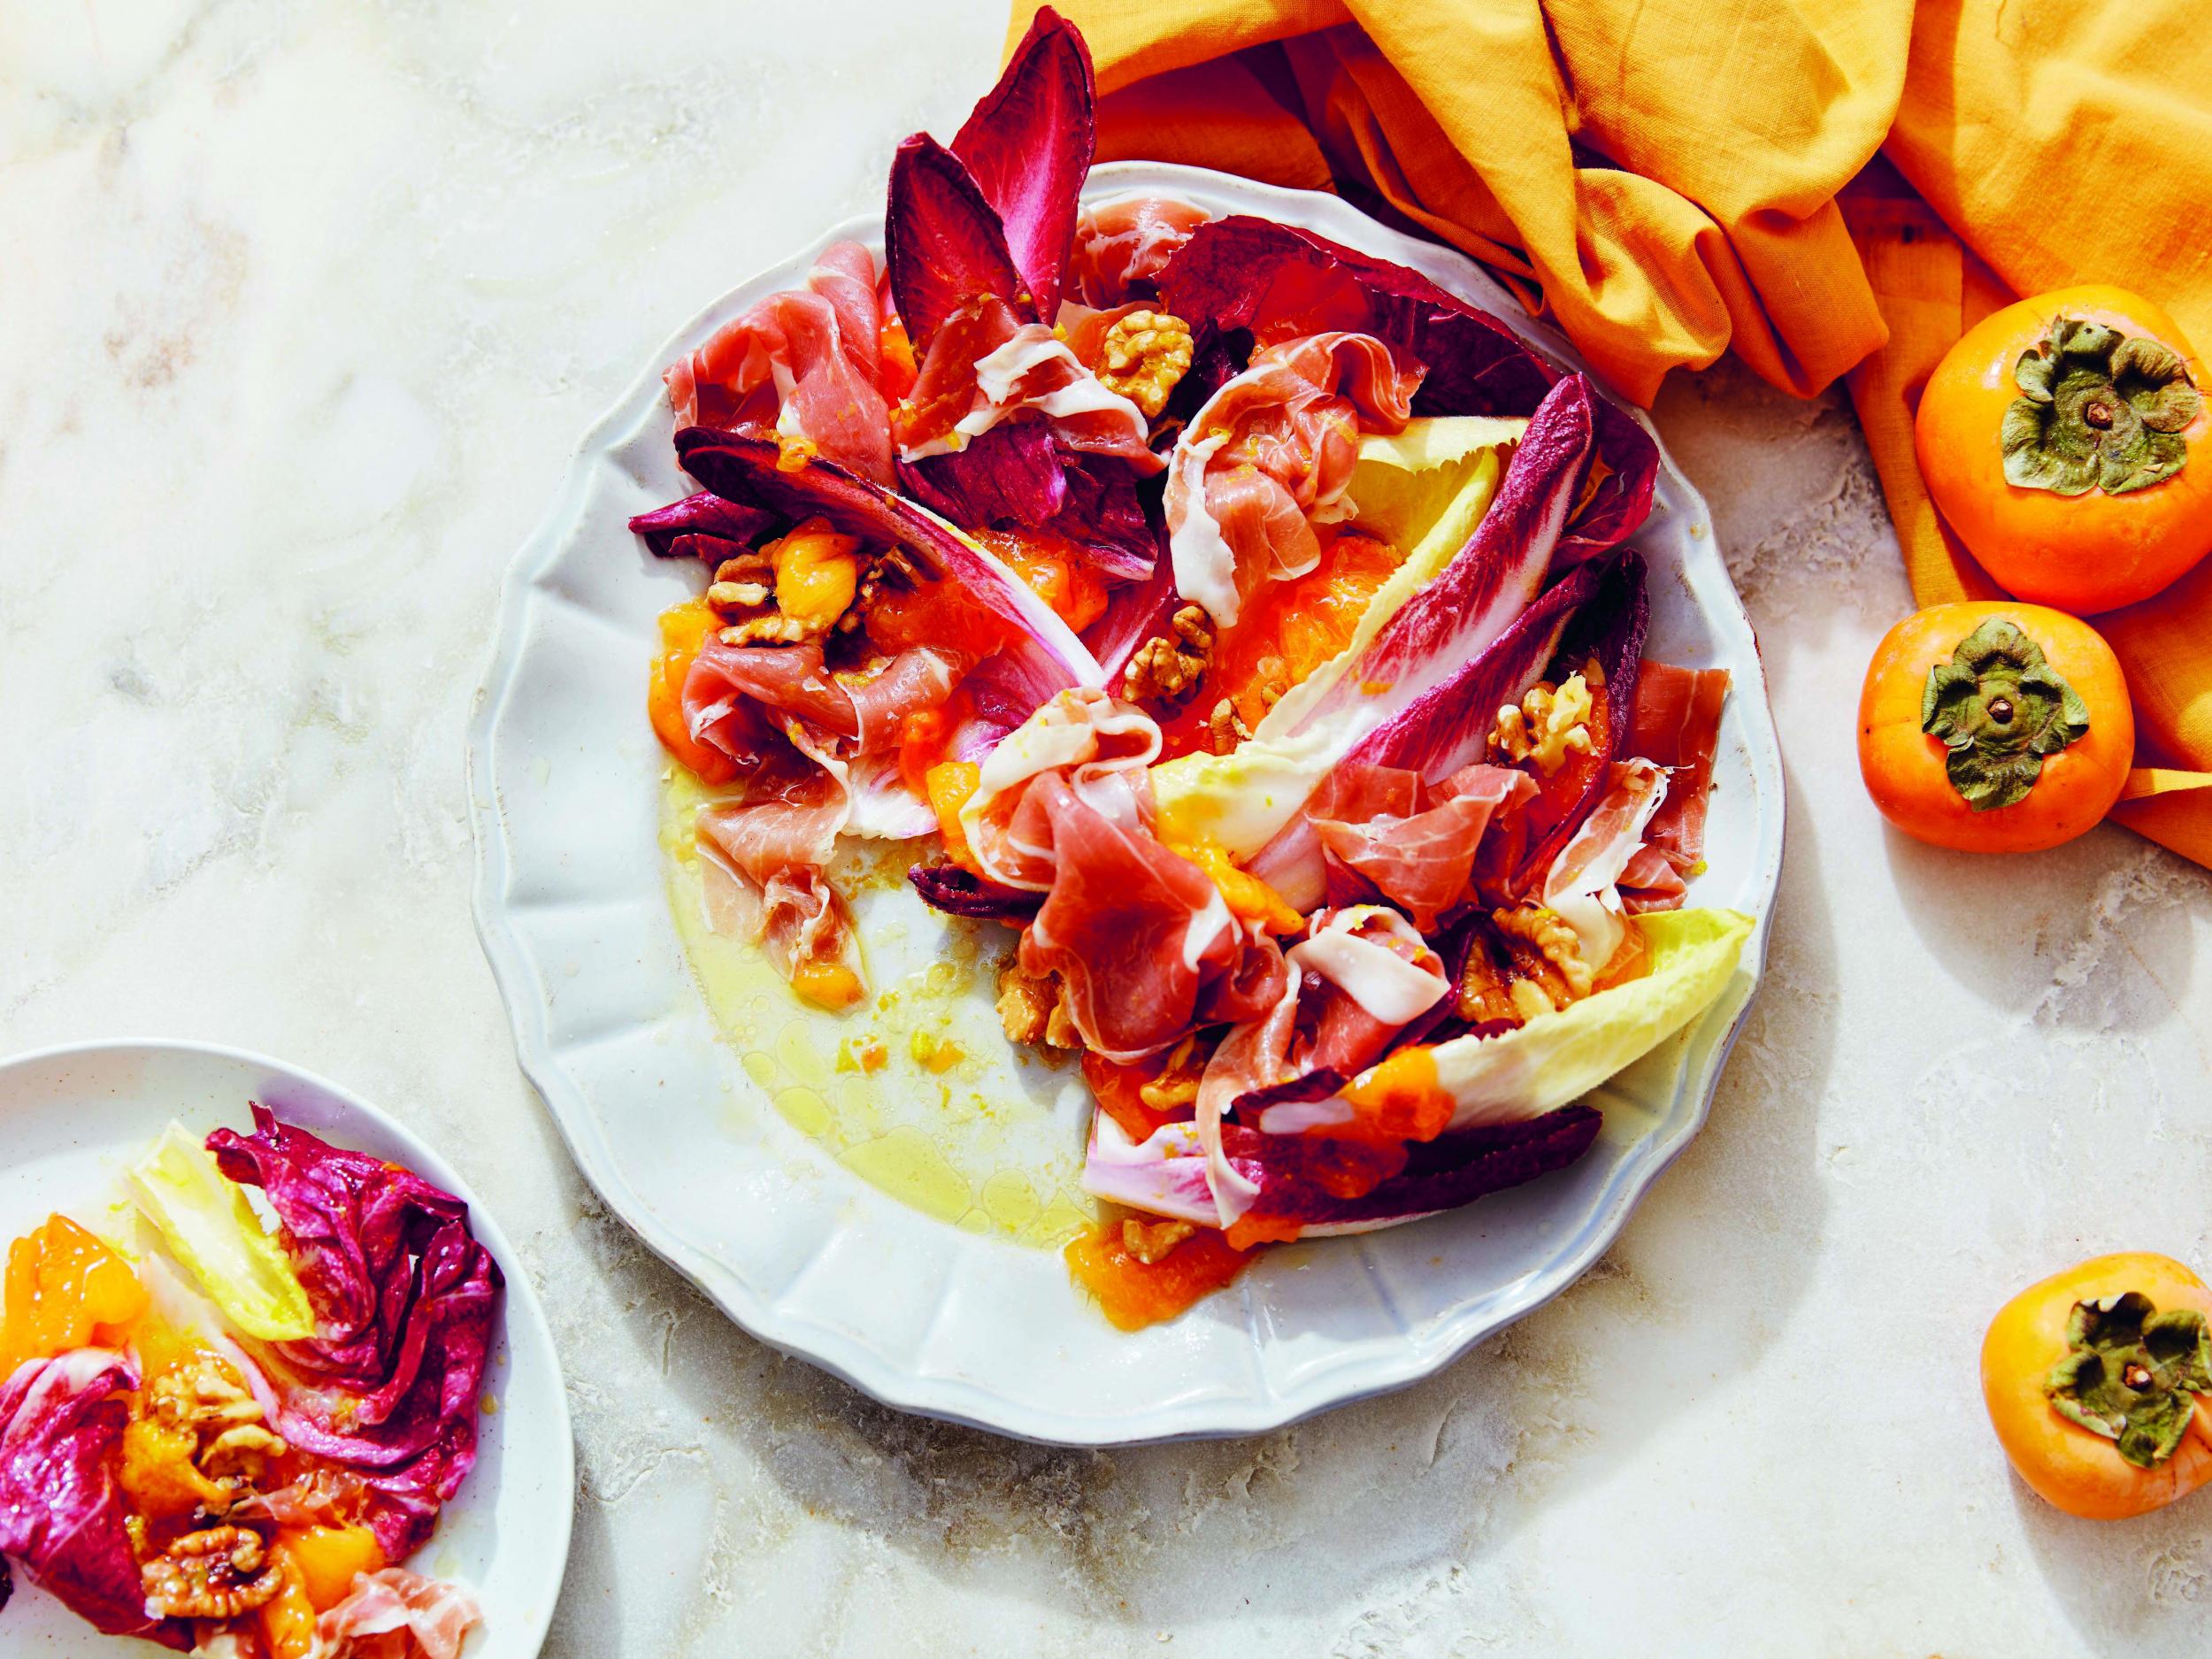 Salty prosciutto is the perfect foil to the sweetness of persimmon